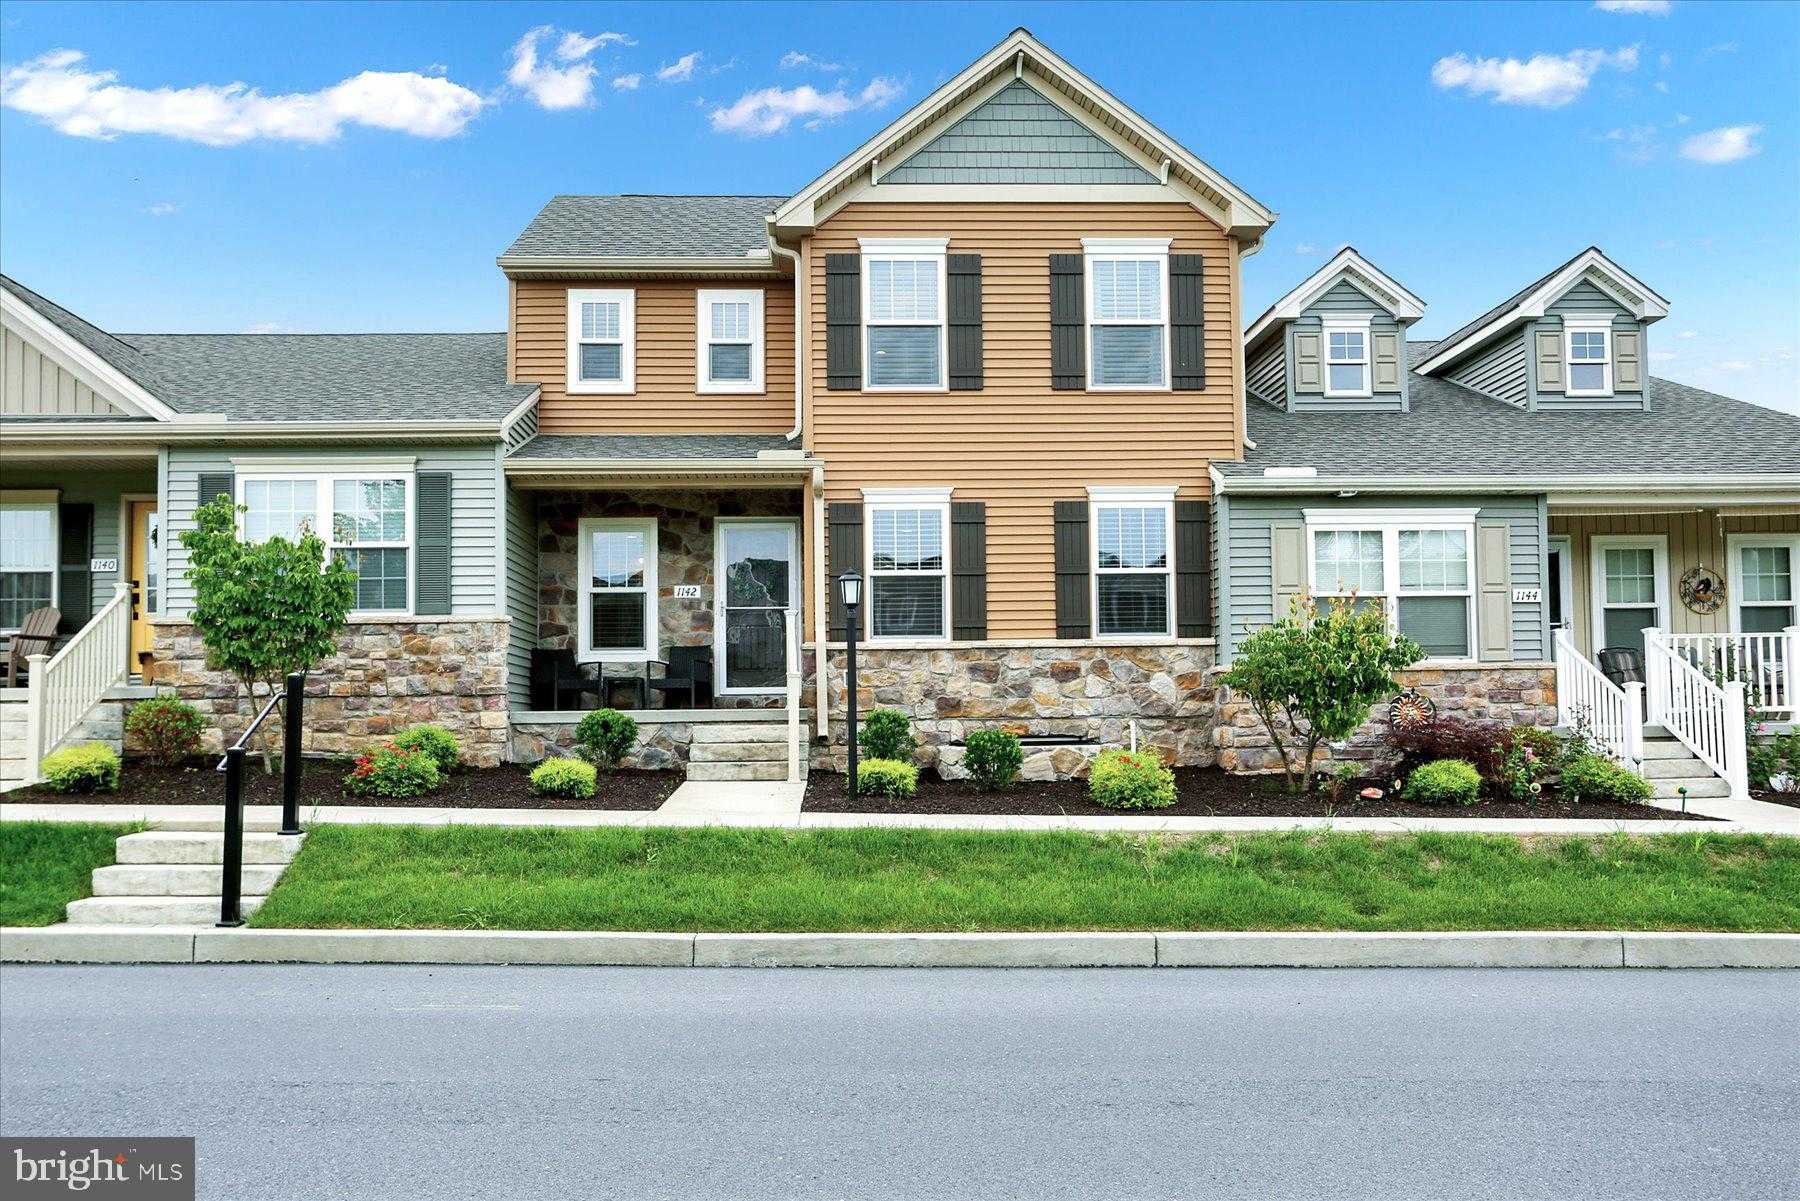 View HARRISBURG, PA 17111 townhome